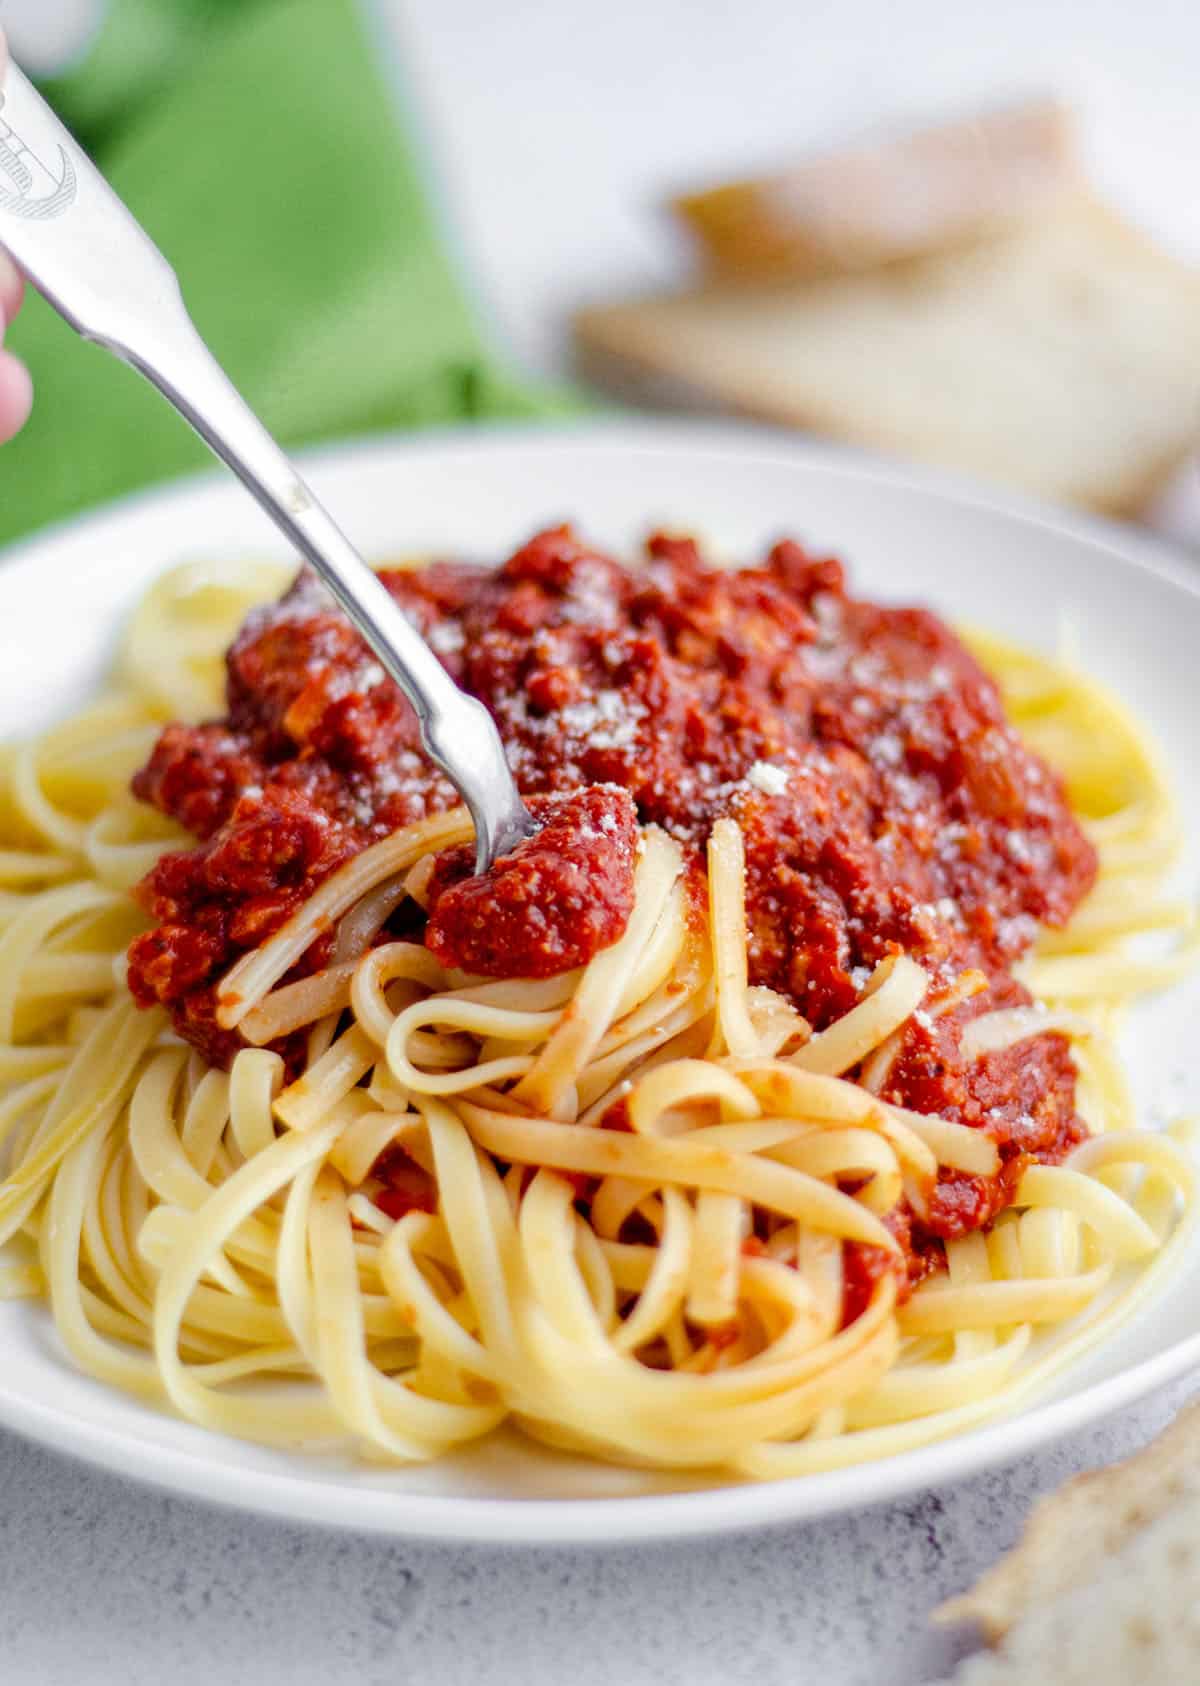 plate of spaghetti with meat sauce with a fork twirling some pasta